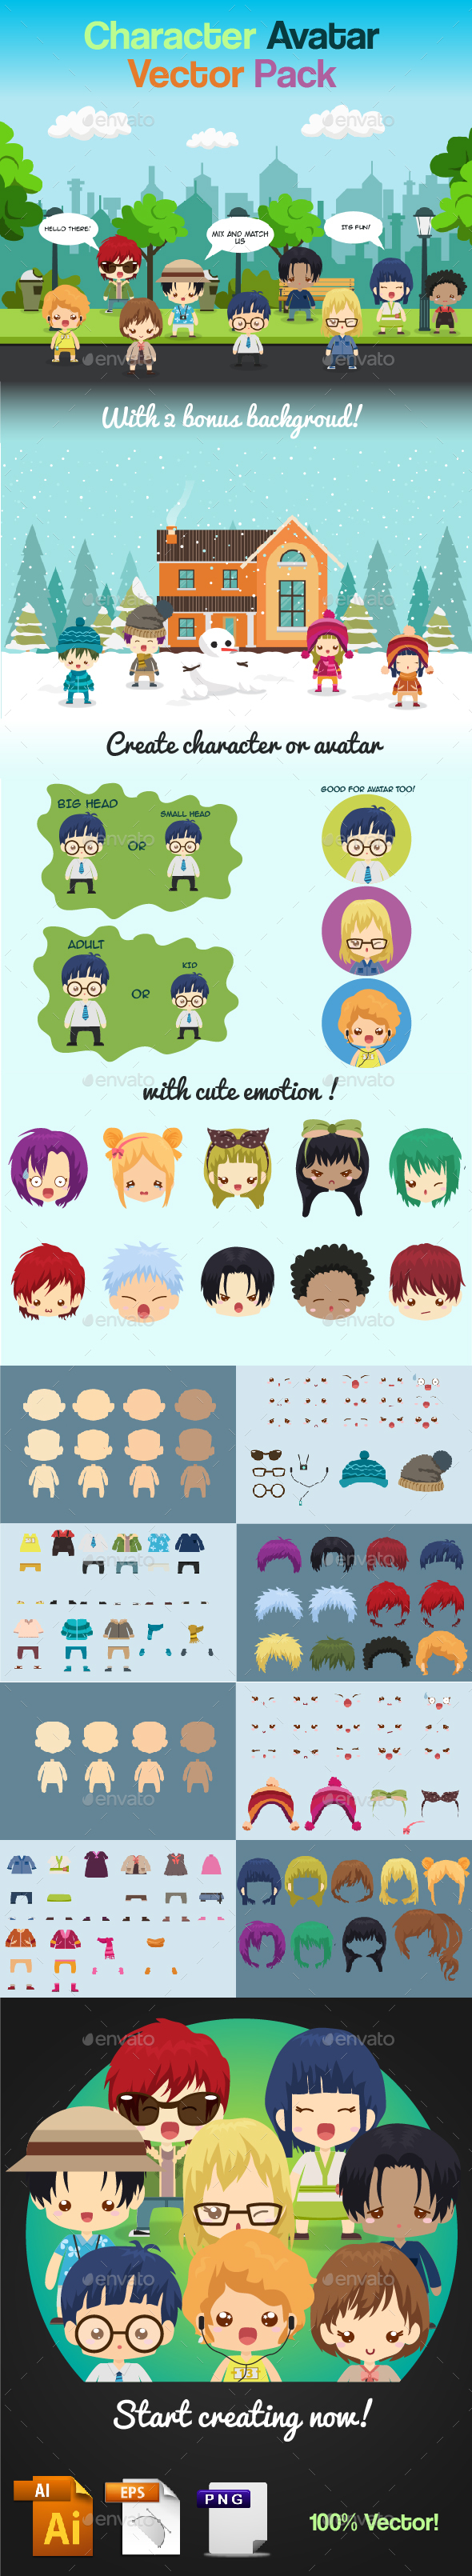 GraphicRiver Character Avatar Vector Pack 20857856